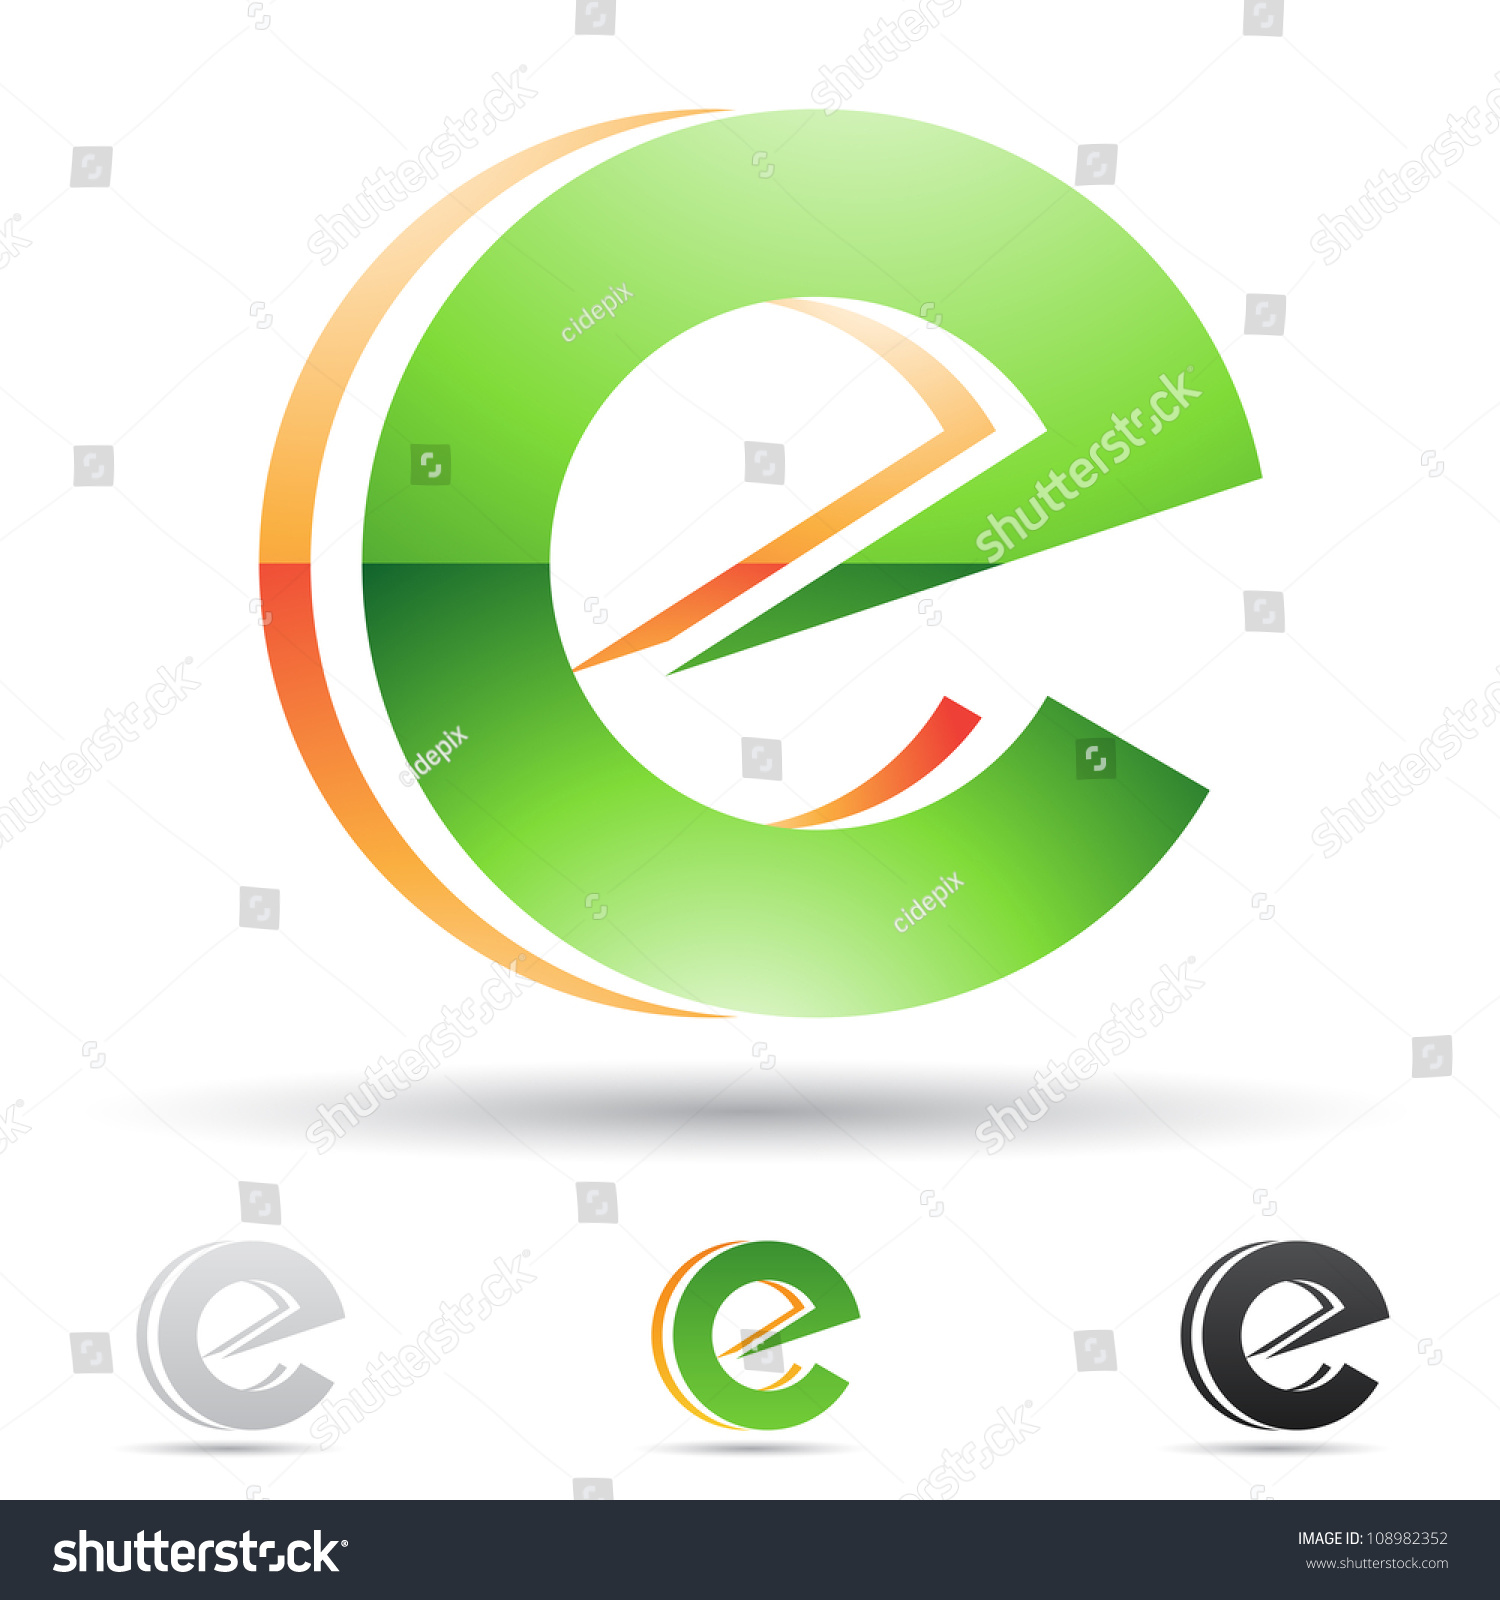 Vector Illustration Of Abstract Icons Of Letter E - Set 3 - 108982352